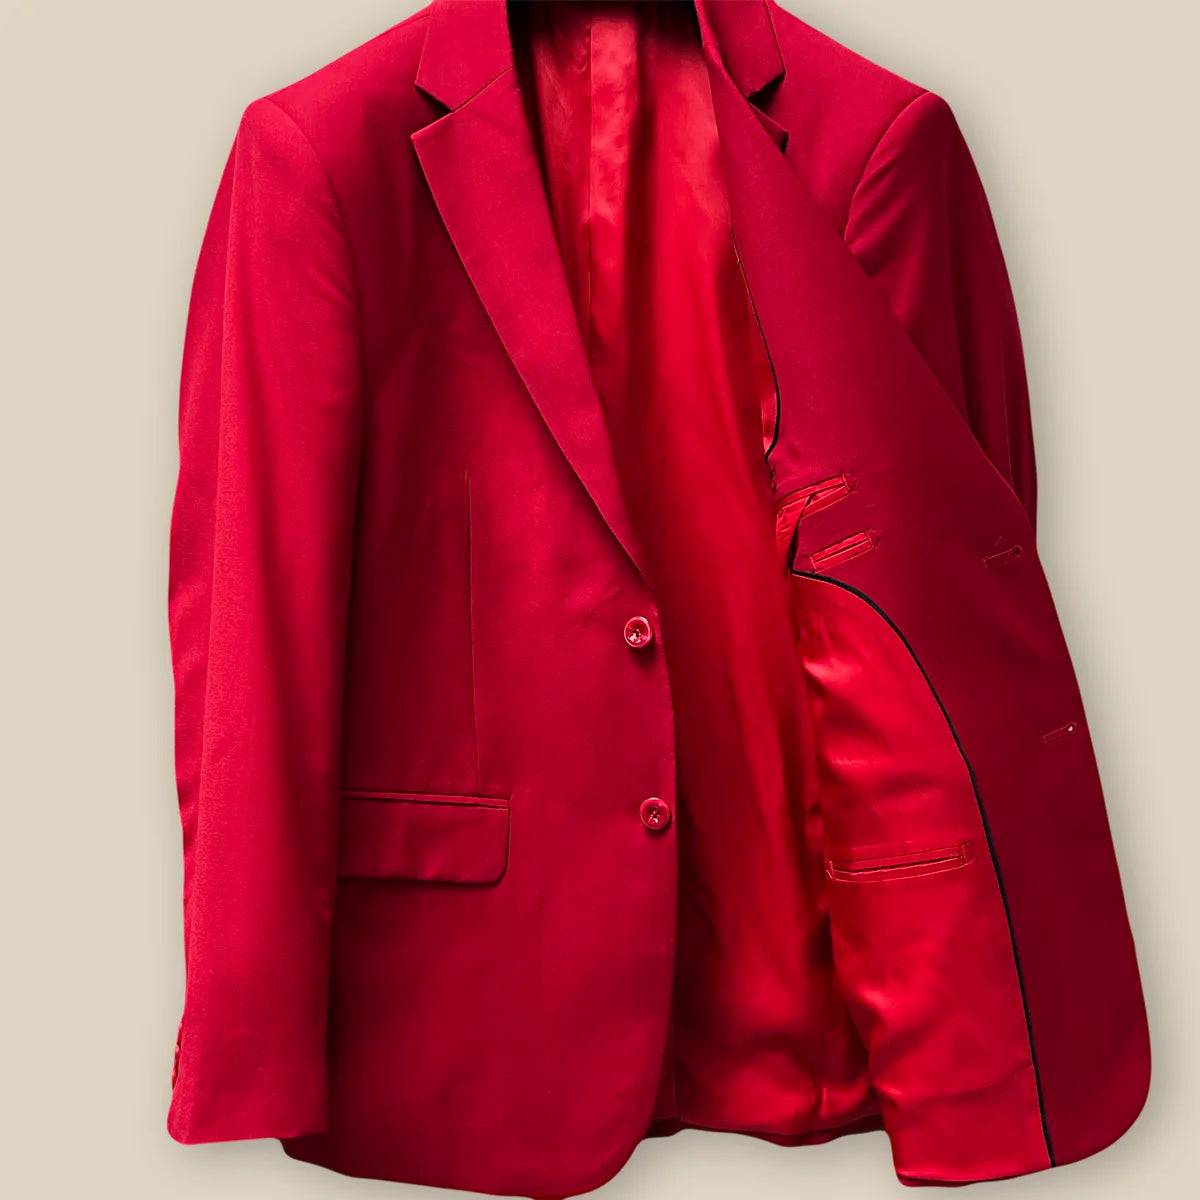 Inside jacket left view displaying the inner lining and pockets on a scarlet red, solid plain color suit.